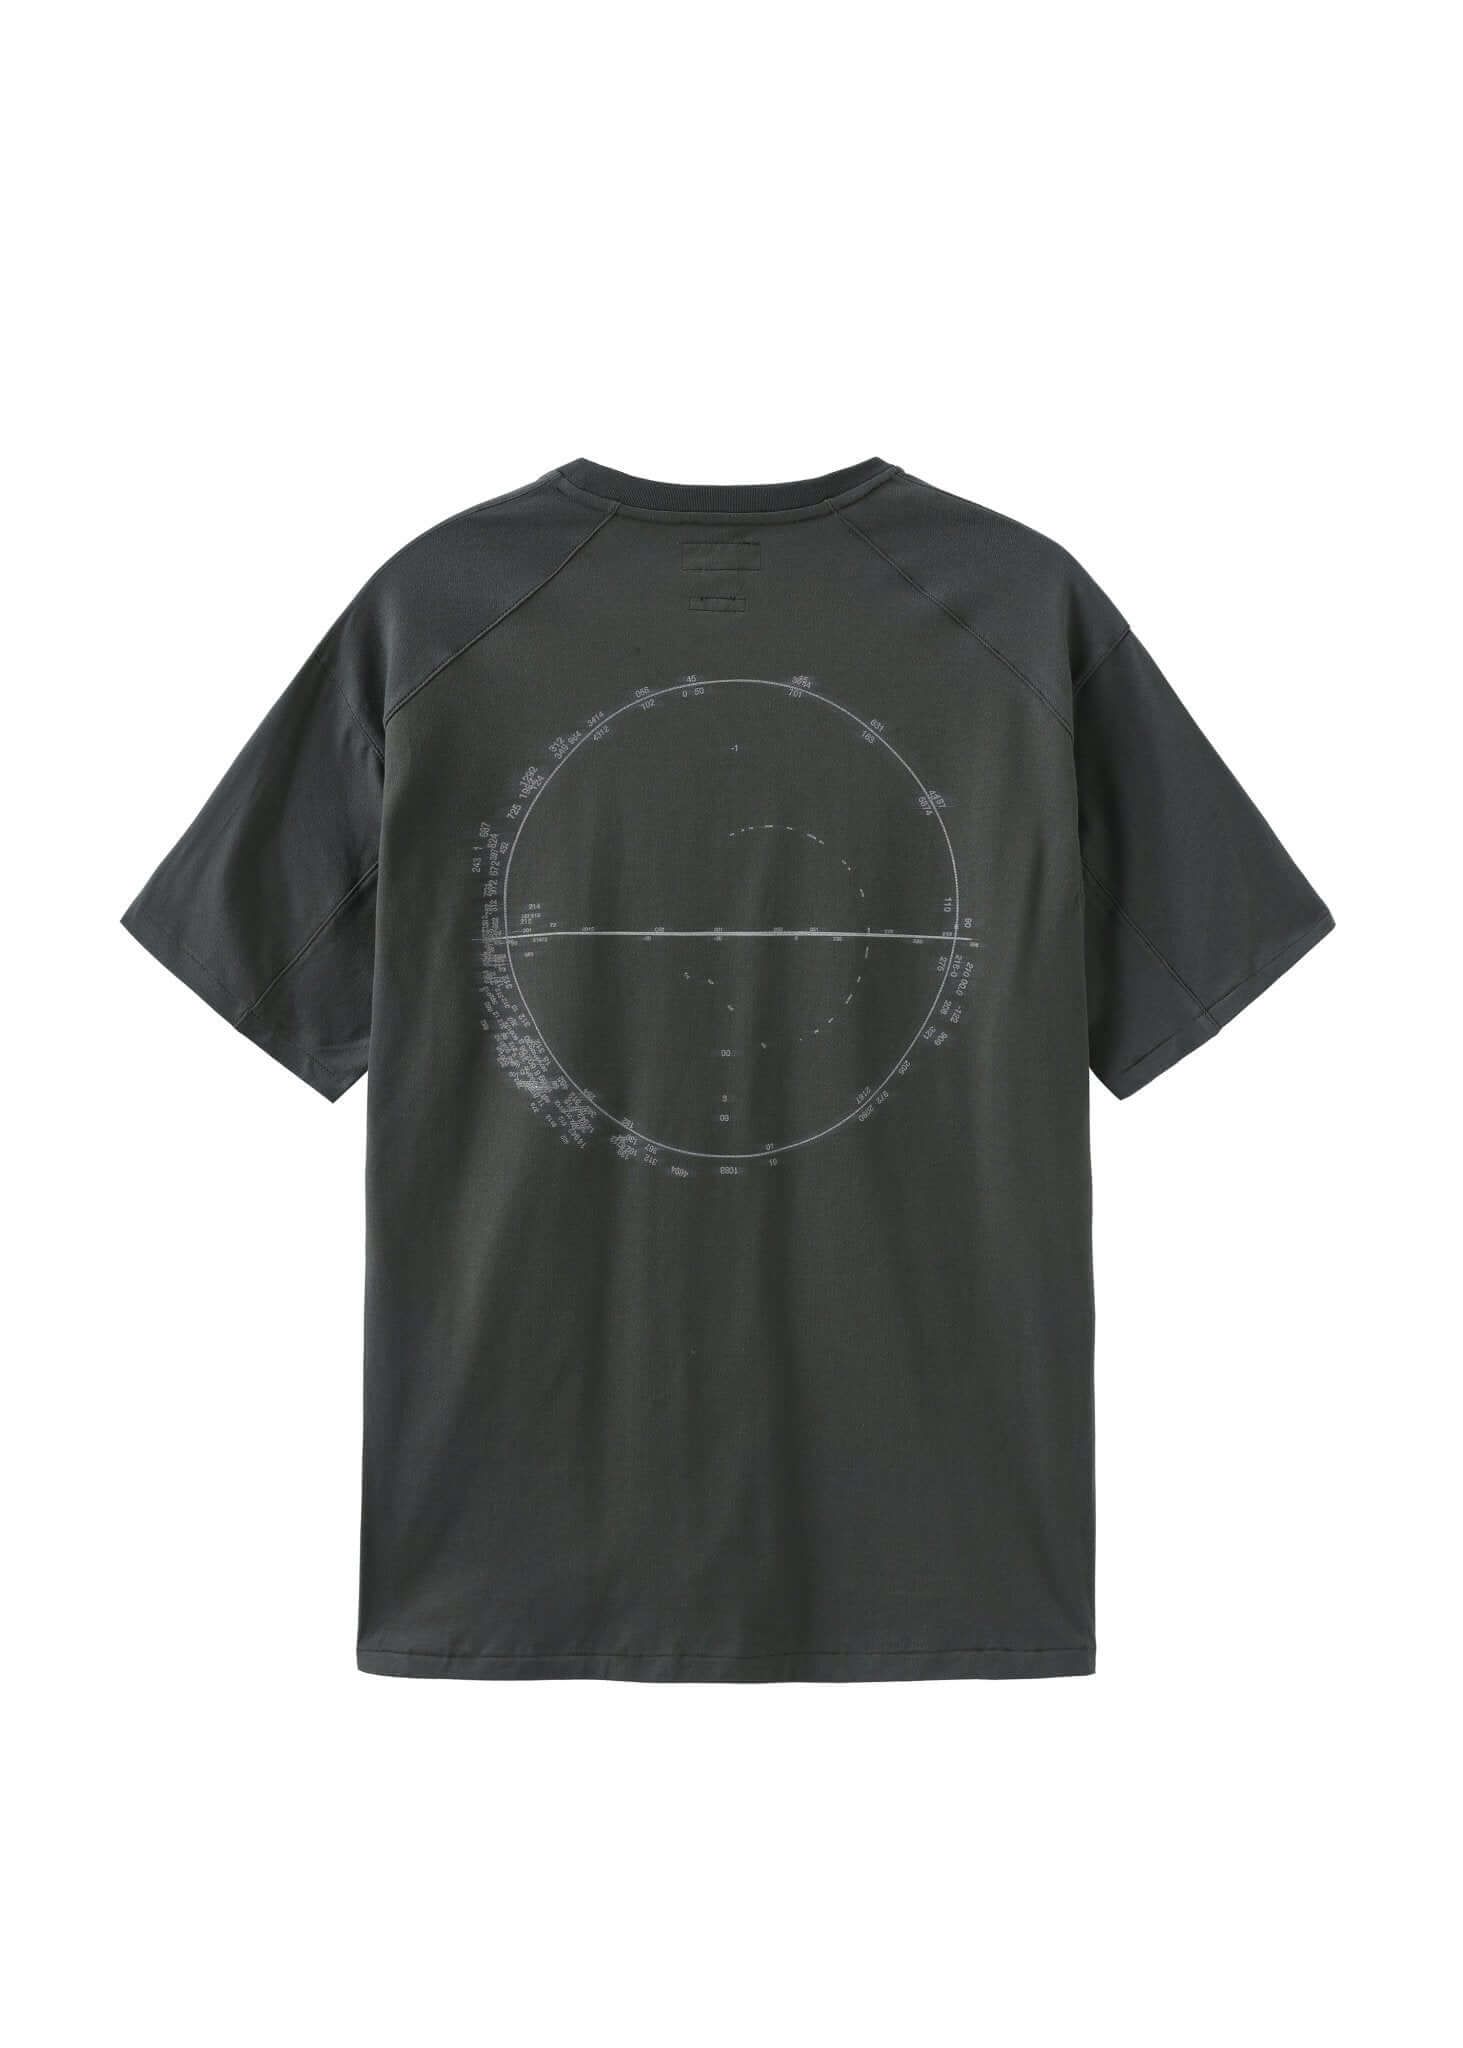 Distorted Coordinate Graphic Printed T-Shirt - NILMANCE